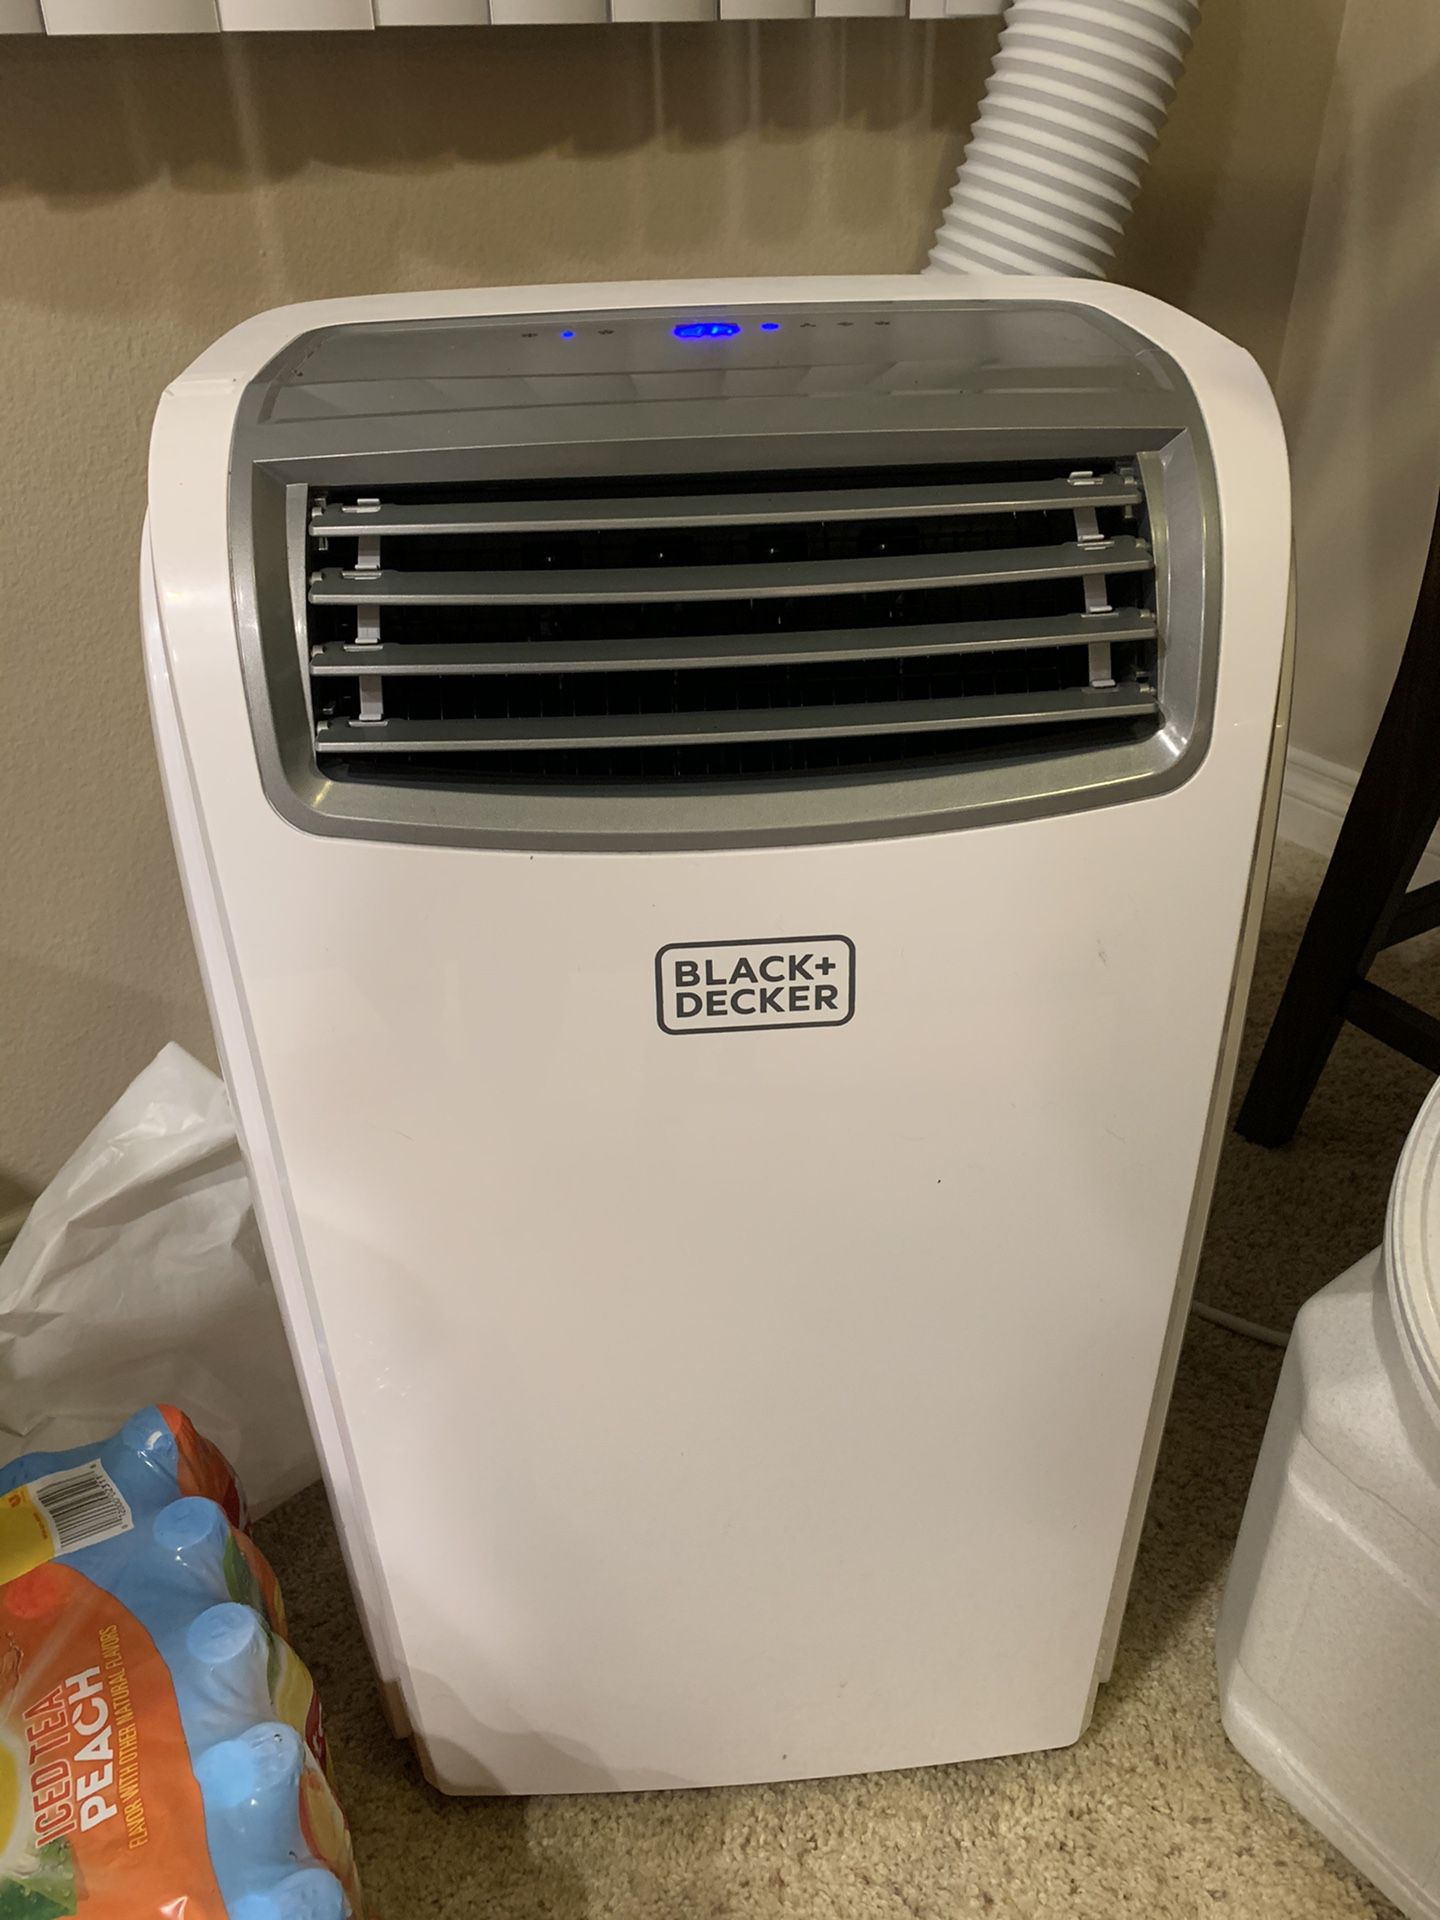 Black and decker dehumidifier and AC unit